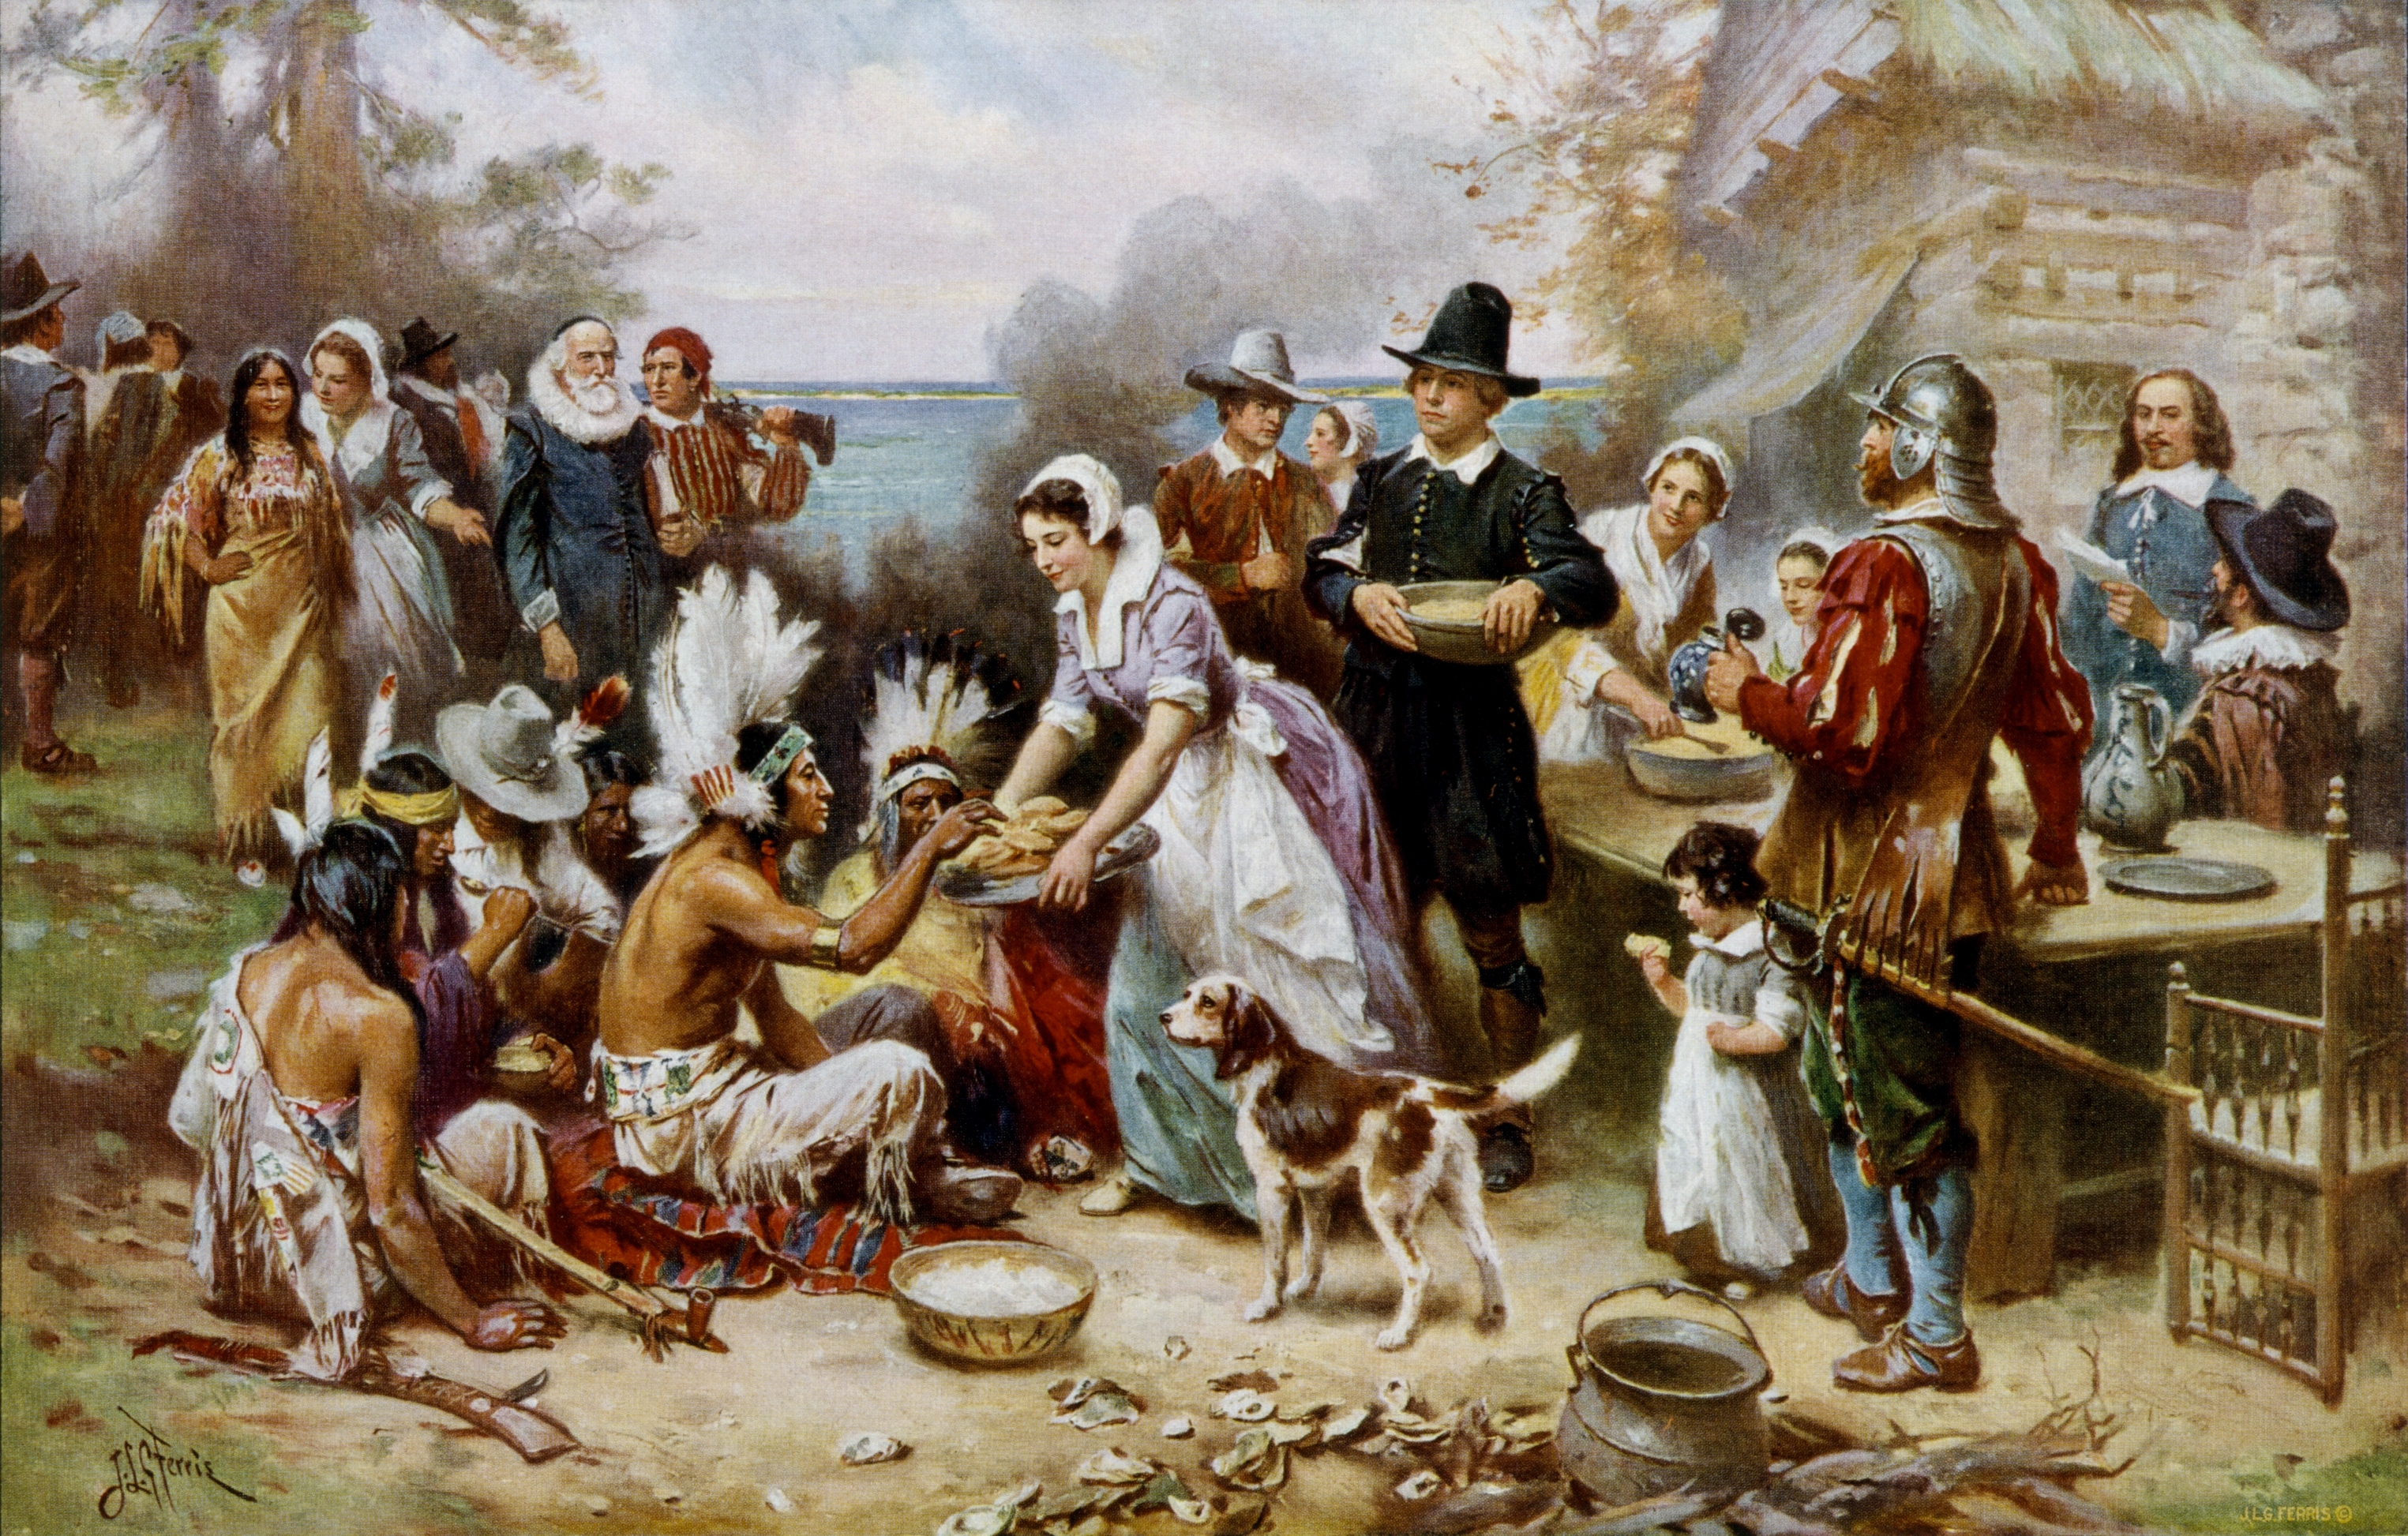 Jean Leon Gerome Ferris's The First Thanksgiving 1621.